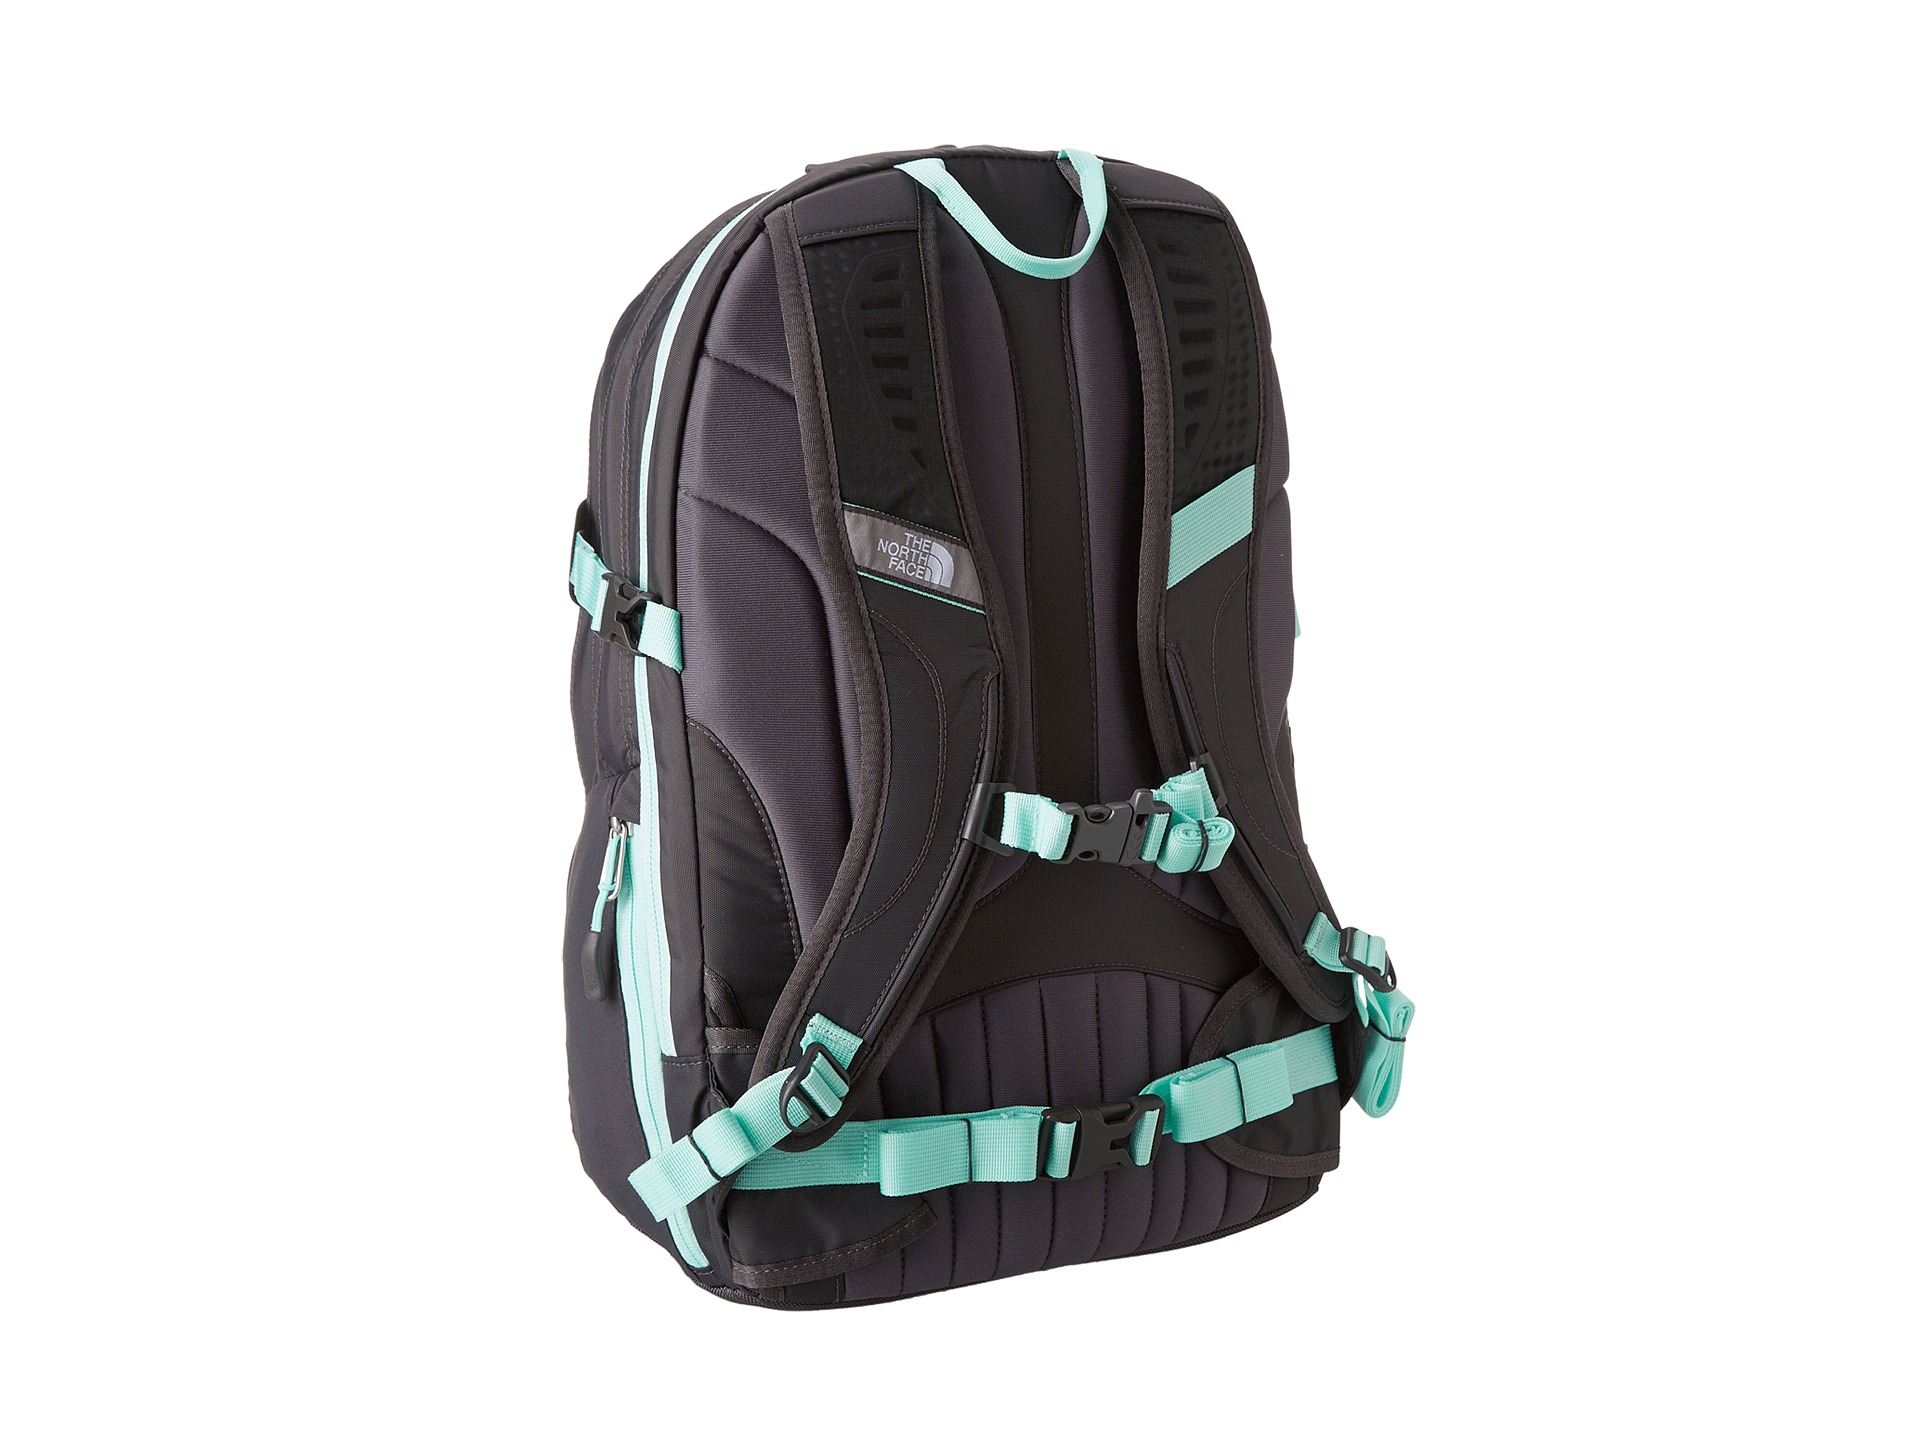 grey and mint green north face backpack